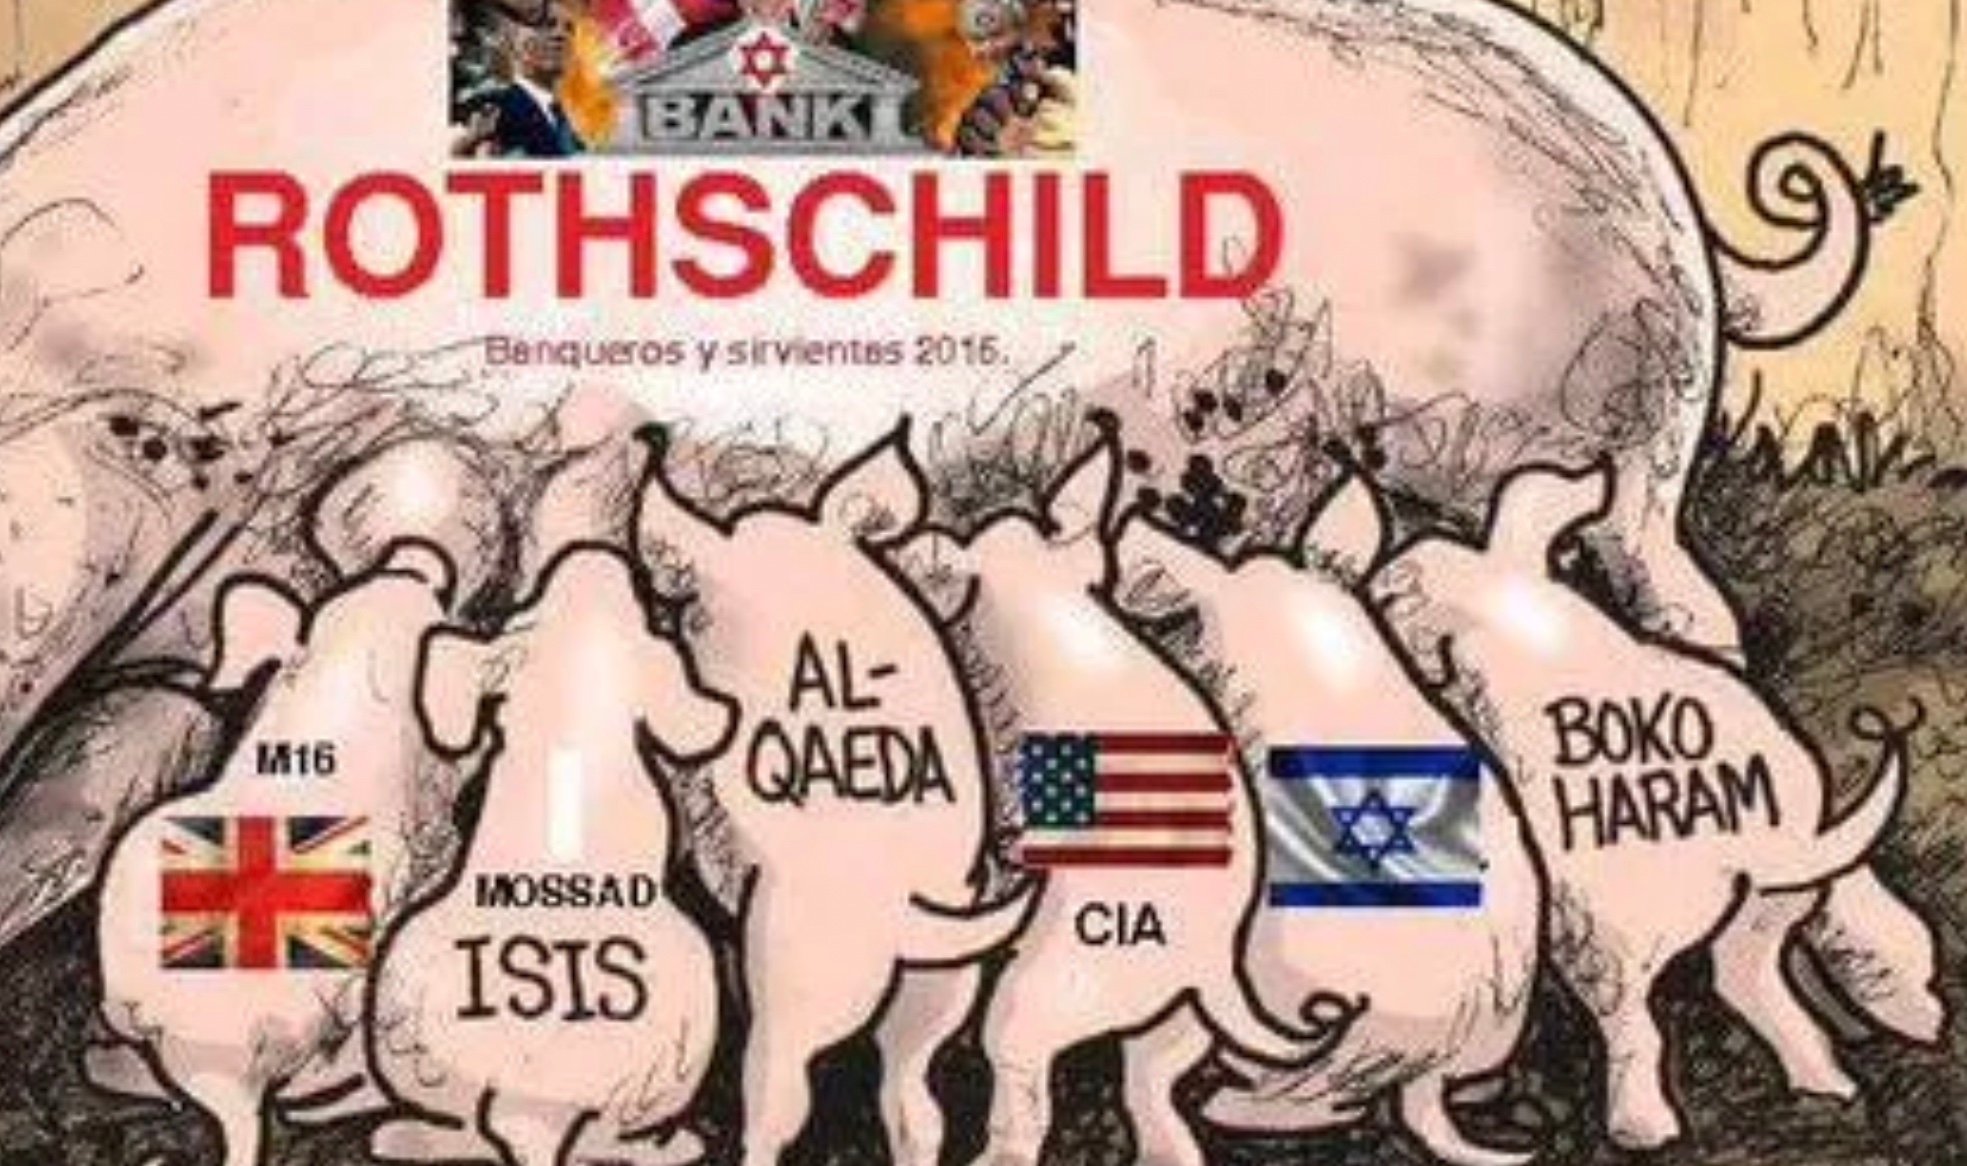 Debunking the Rothschilds Conspiracy Theory: From Frankfurt to Tehran